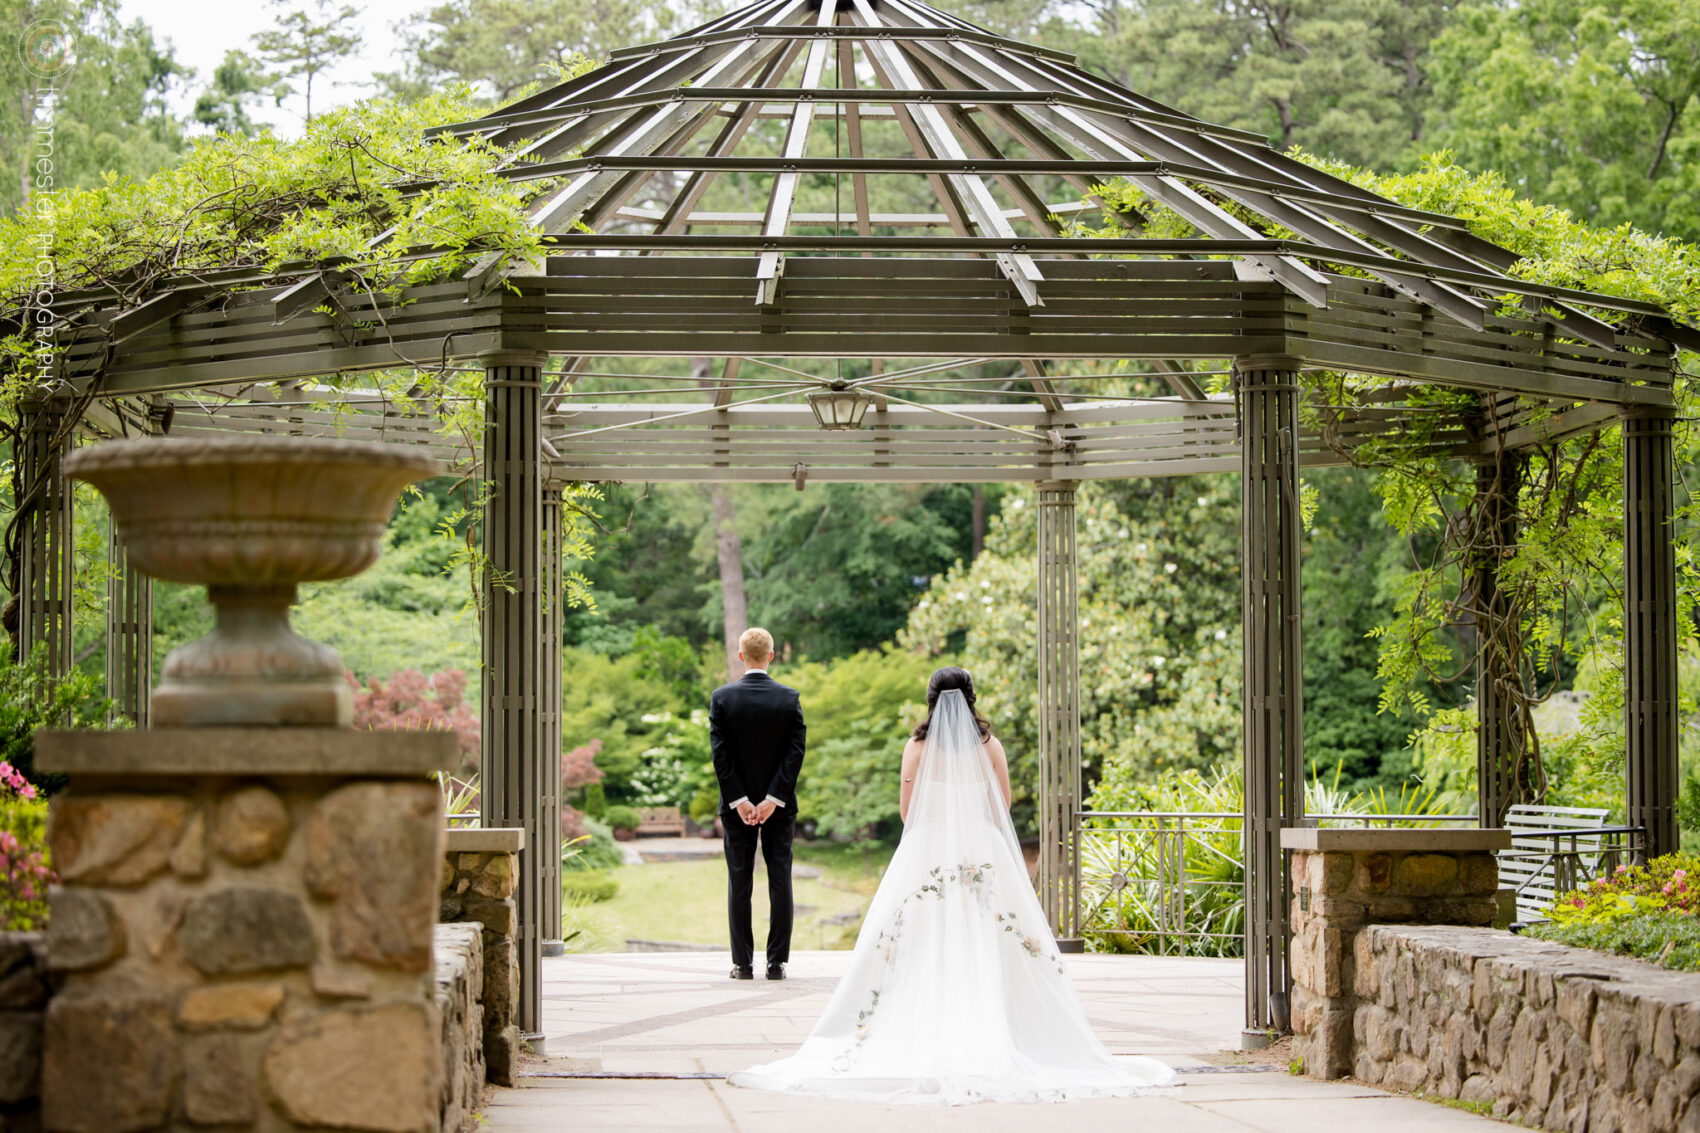 A wedding and first look at Duke Gardens in Durham, NC